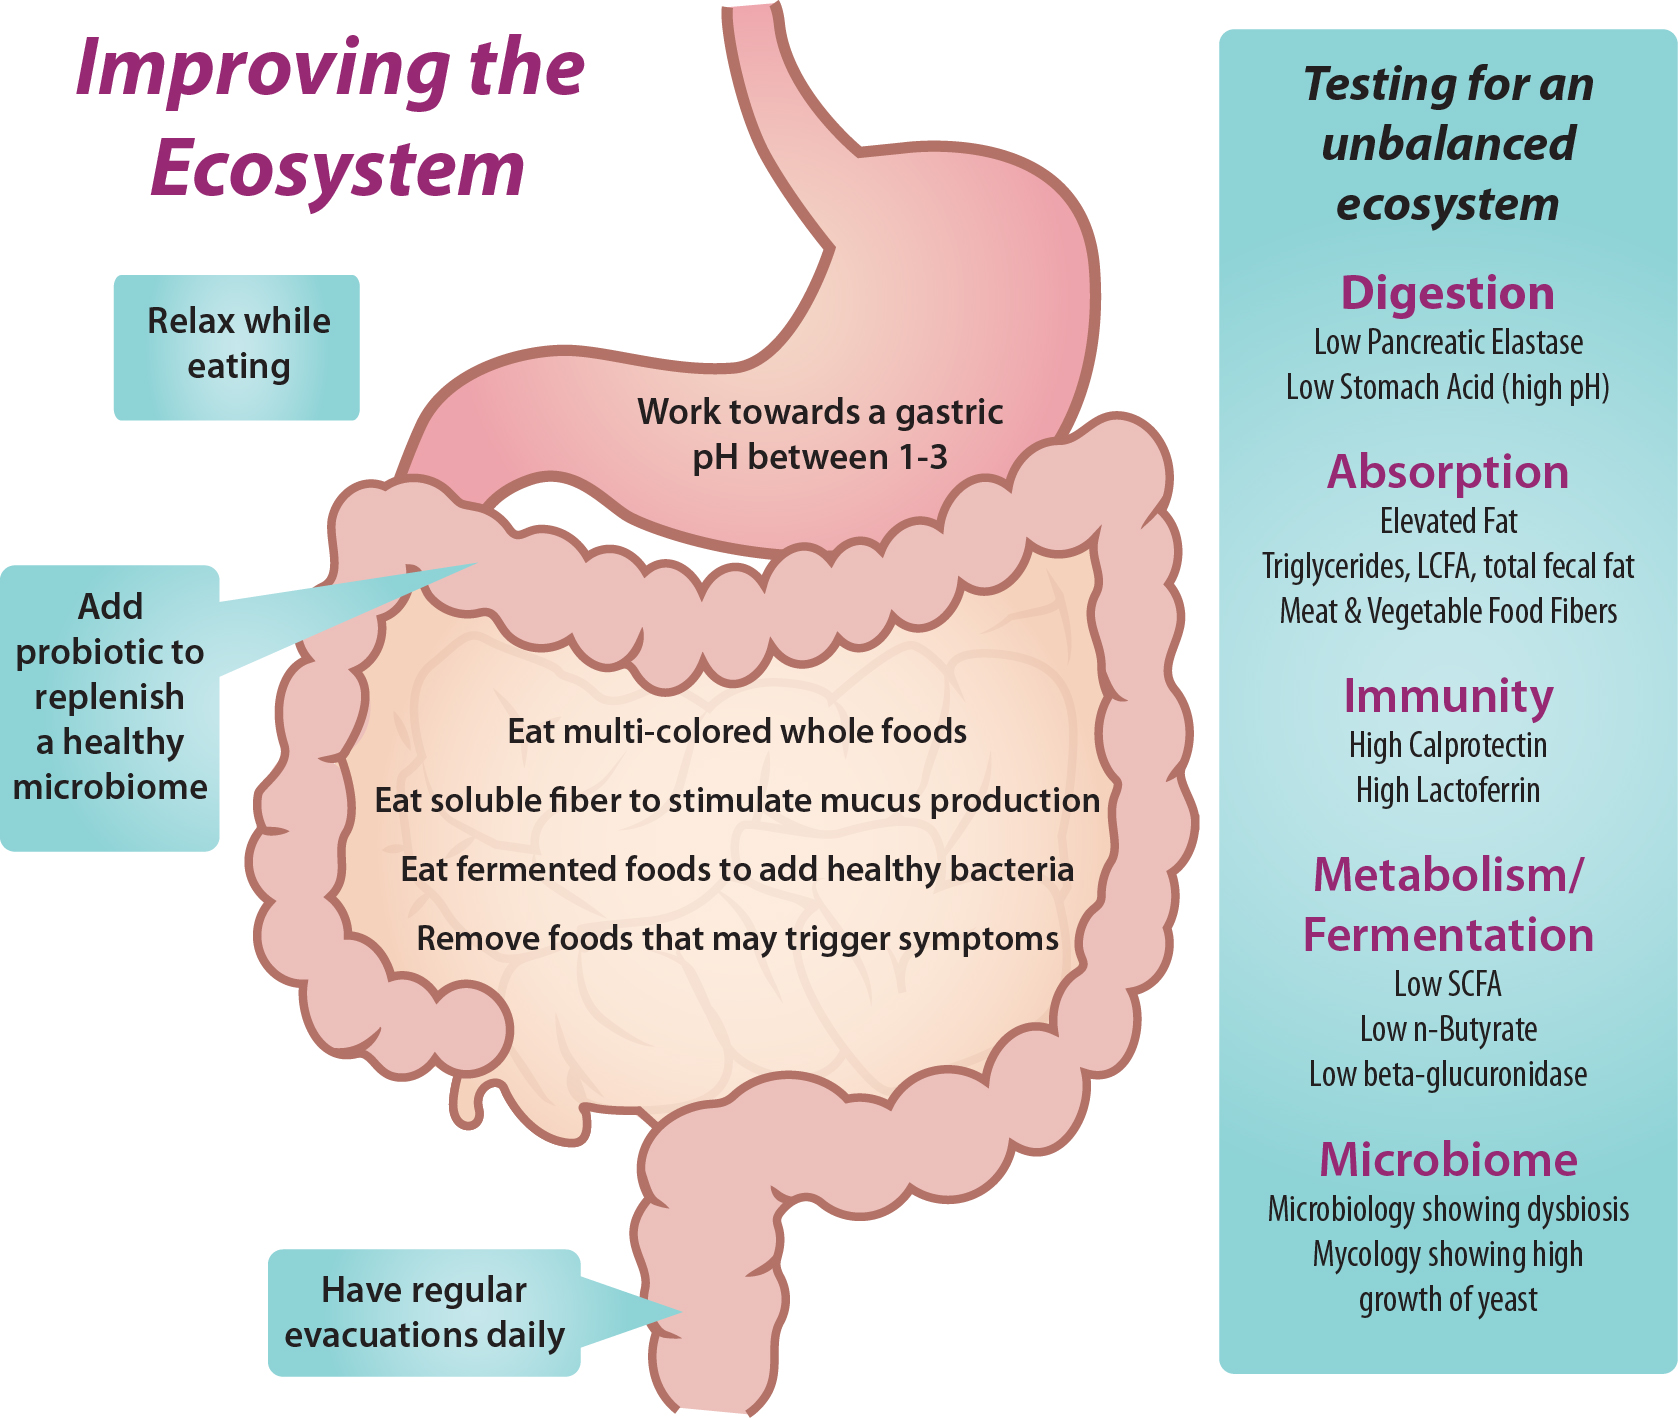 Graphic of stomach and intestinal tract. Through the course of the graphic, tips state: Relax while eating. Work towards a gastric pH between 1-3. Add probiotic to replenish a healthy microbiome. Eat multi-colored whole foods. Eat soluble fiber to stimulate mucus production. Eat fermented foods to add healthy bacteria. Remove foods that may trigger symptoms. Have regular evacuations daily. In a side bar to the right of the graphic lists the following information. Header: Testing for an unbalanced ecosystem List: Digestion: Low Pancreatic Elastase; Low Stomach Acid (high pH). Absorption: Elevated Fat; Triglycerides, LCFA, total fecal fat; Meat & Vegetable Food Fibers. Immunity: High Calprotectin; High Lactoferrin. Metabolism/Fermentation: Low SCFC, Low n-Butyrate, Low beta-glucuronidase. Microbiome: Microbiology showing dysbiosis; Mycology showing high growth of yeast